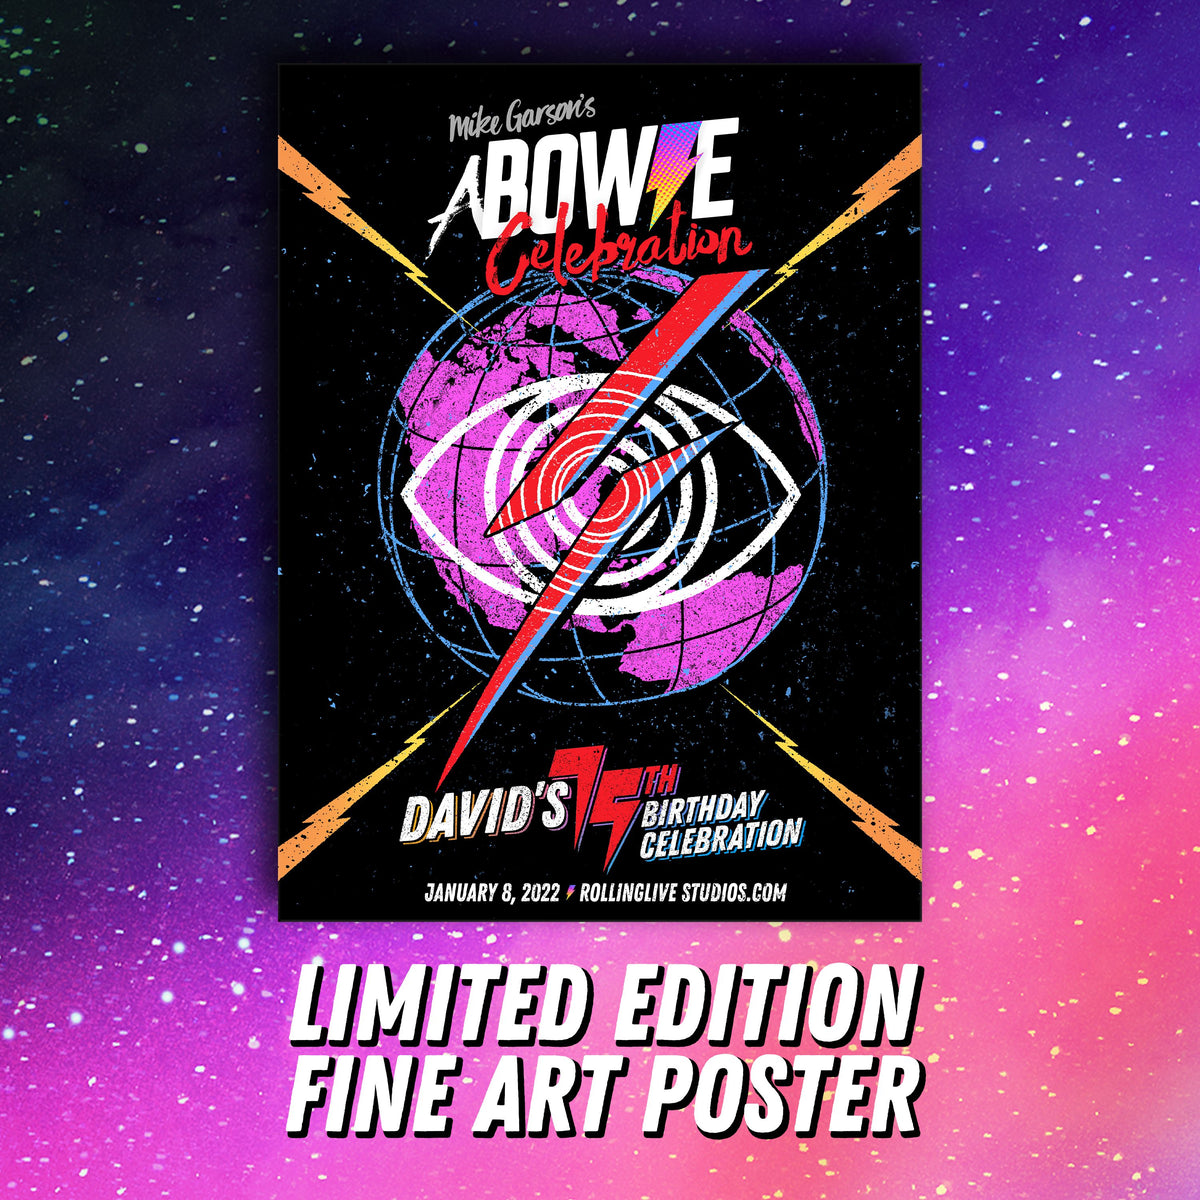 Fine Art Poster, Limited Edition